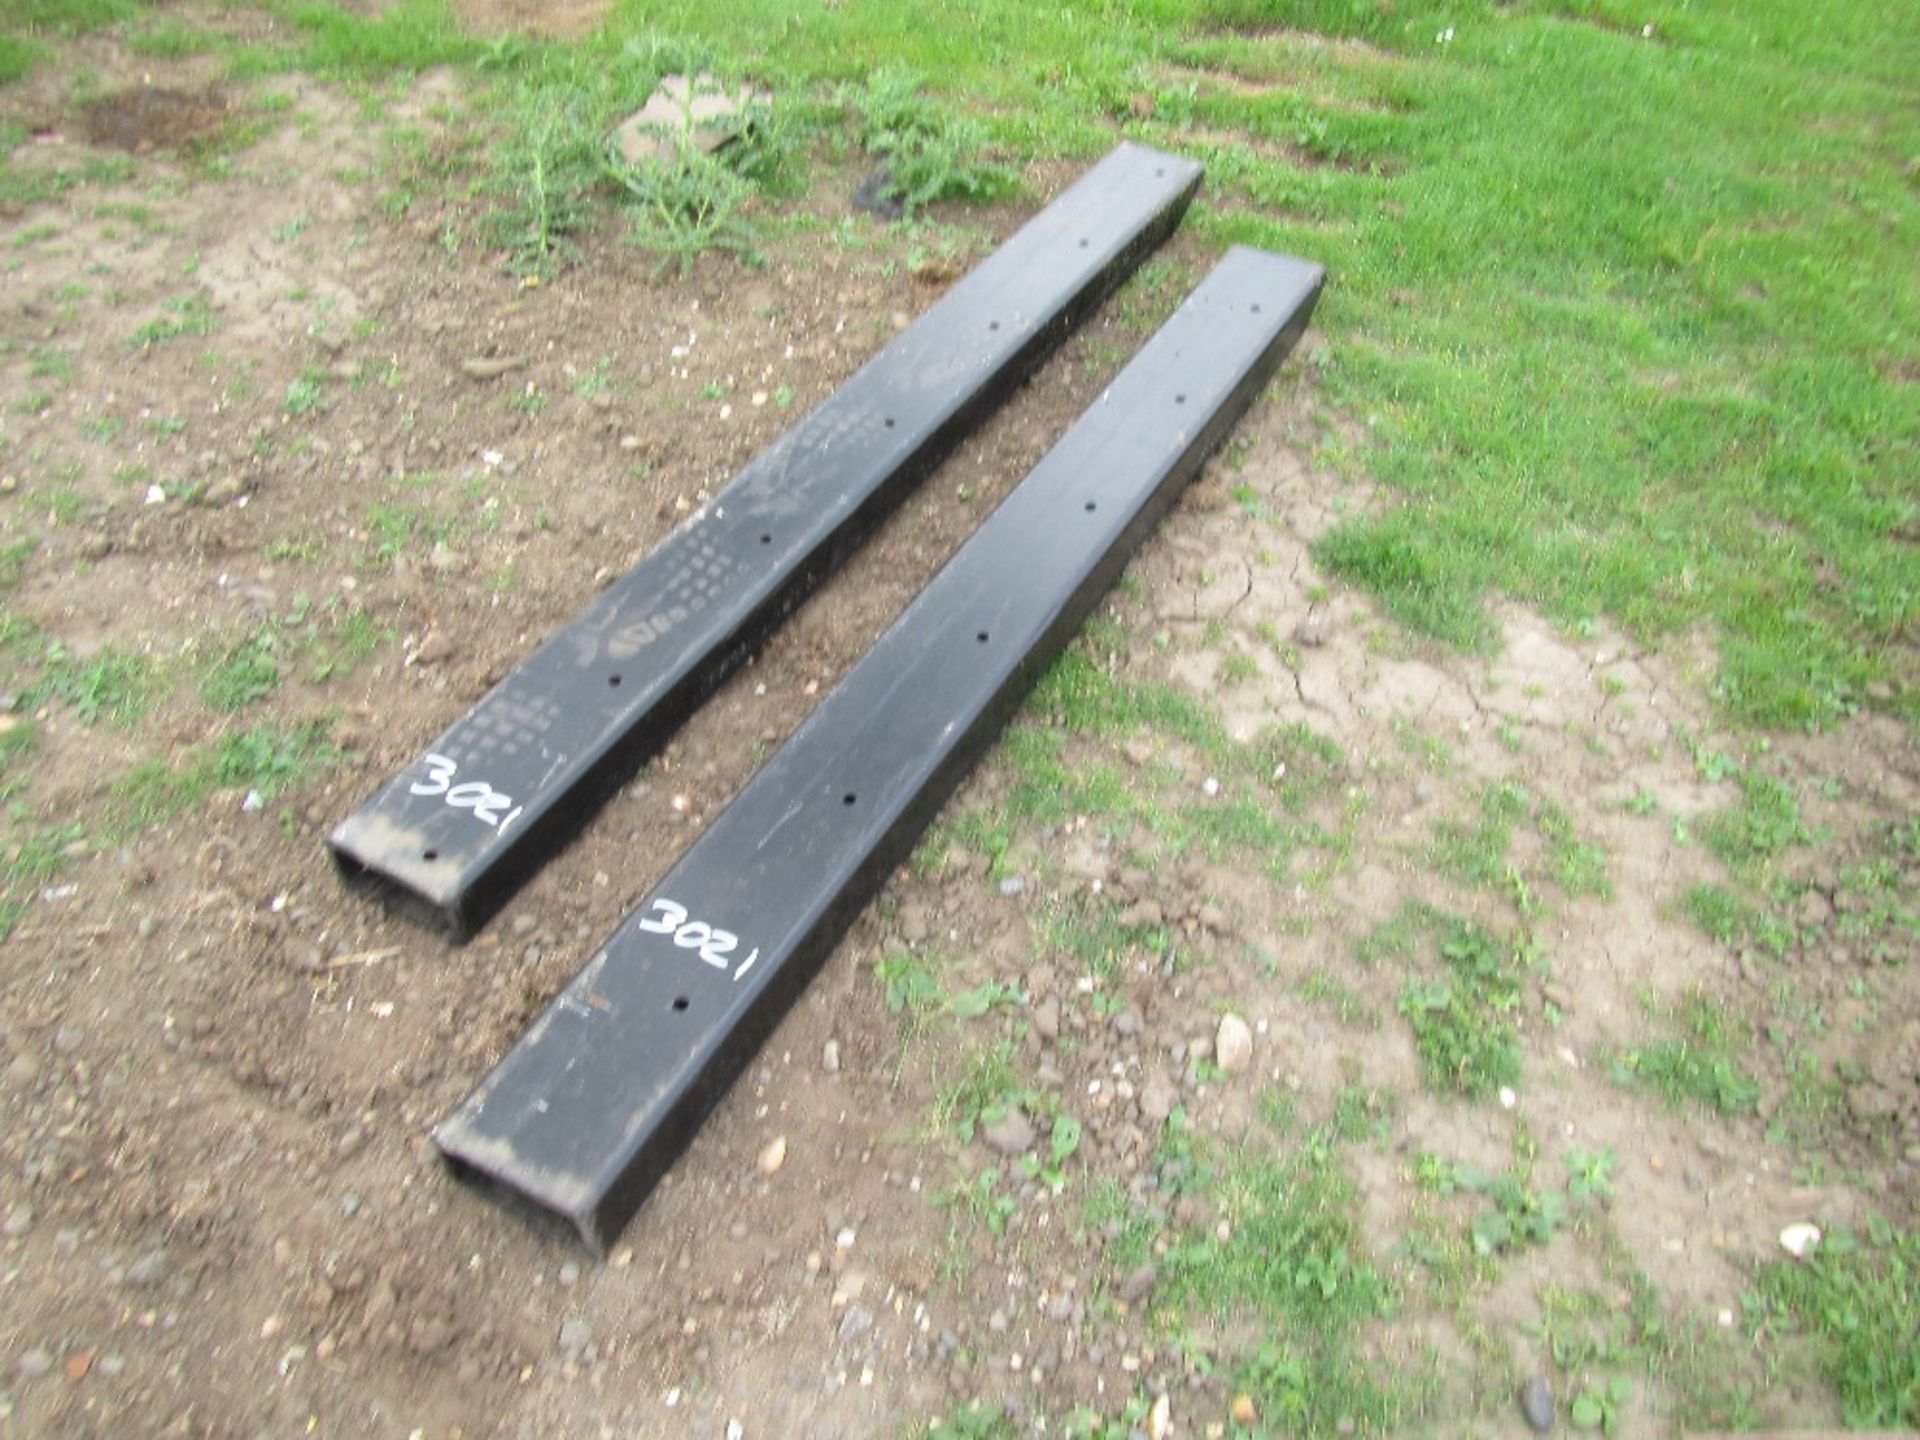 Pr. of Forklift Extension Tines - Image 4 of 4